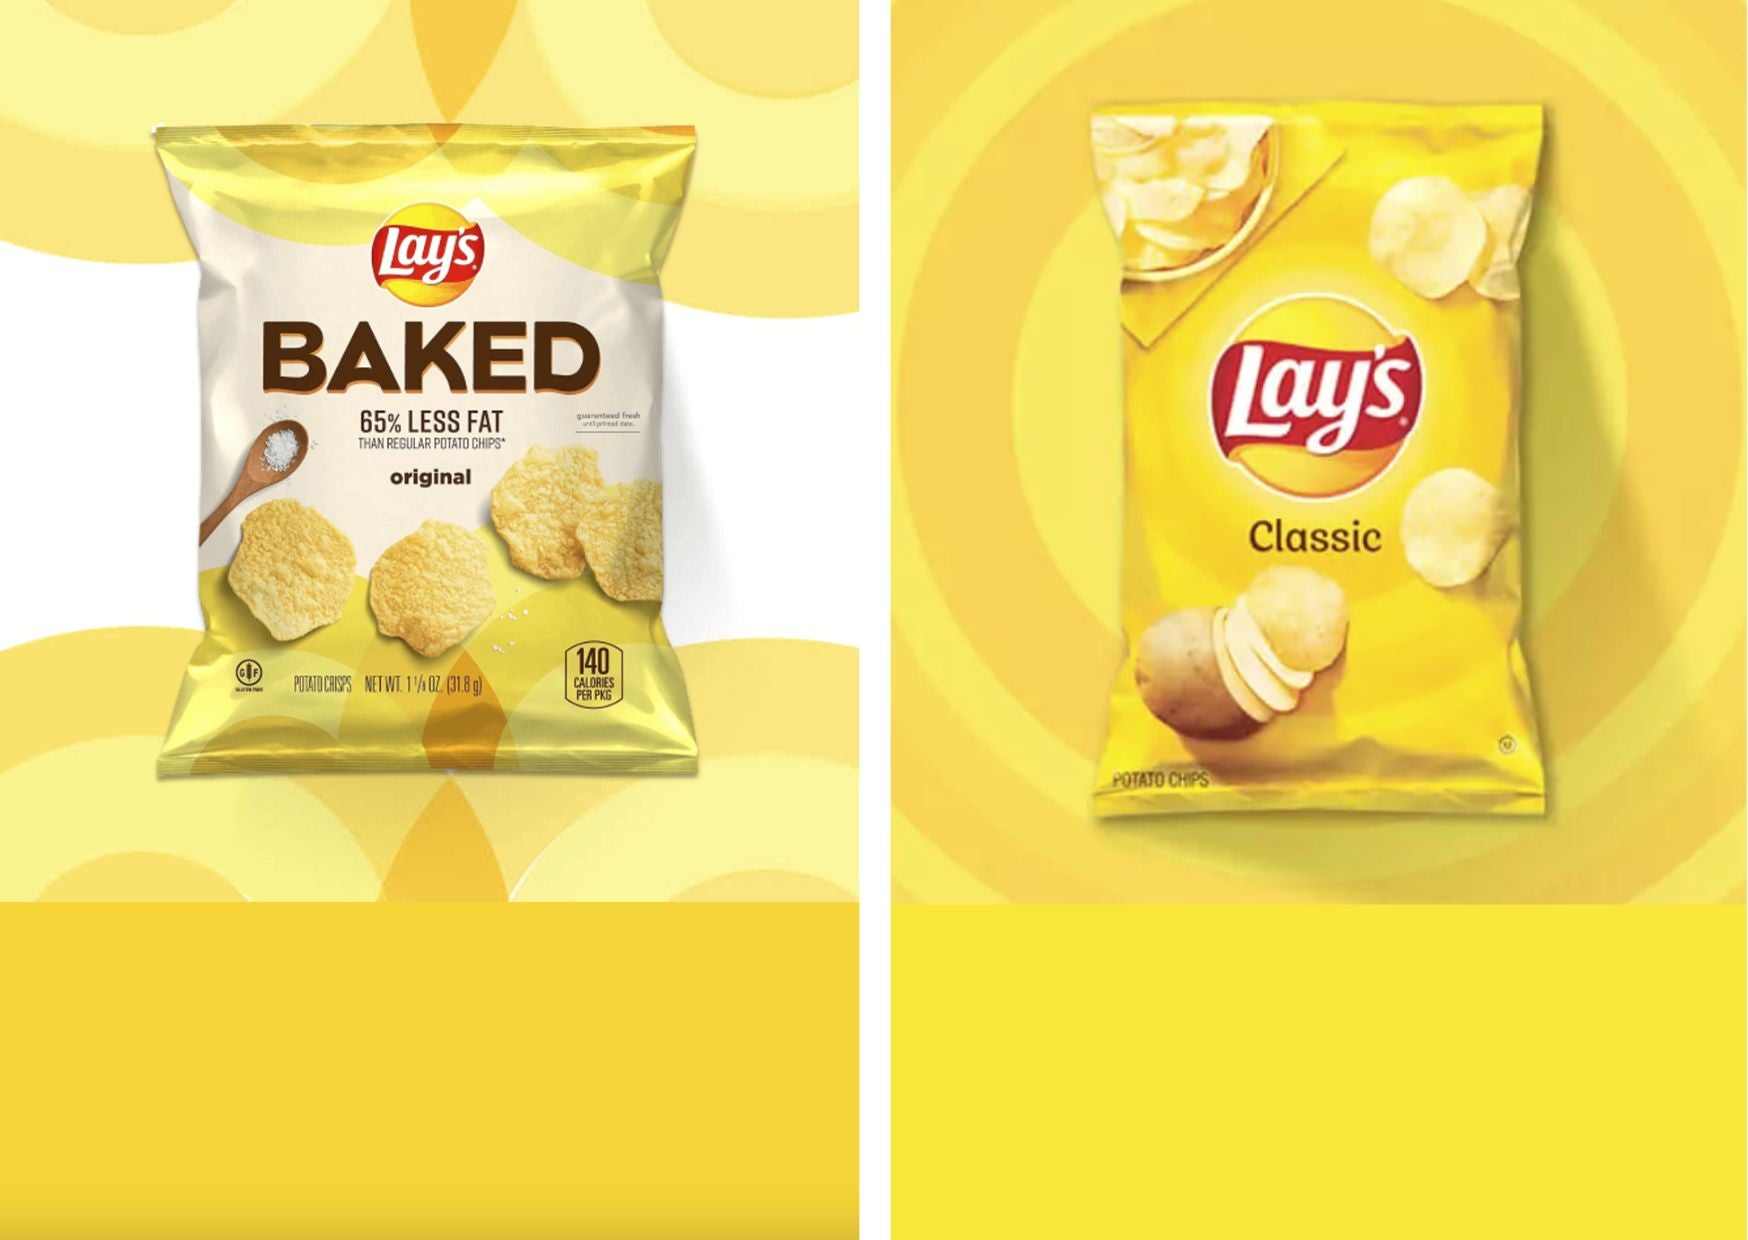 Is Baked Really Better? Examining the Health Halo of Baked Chips